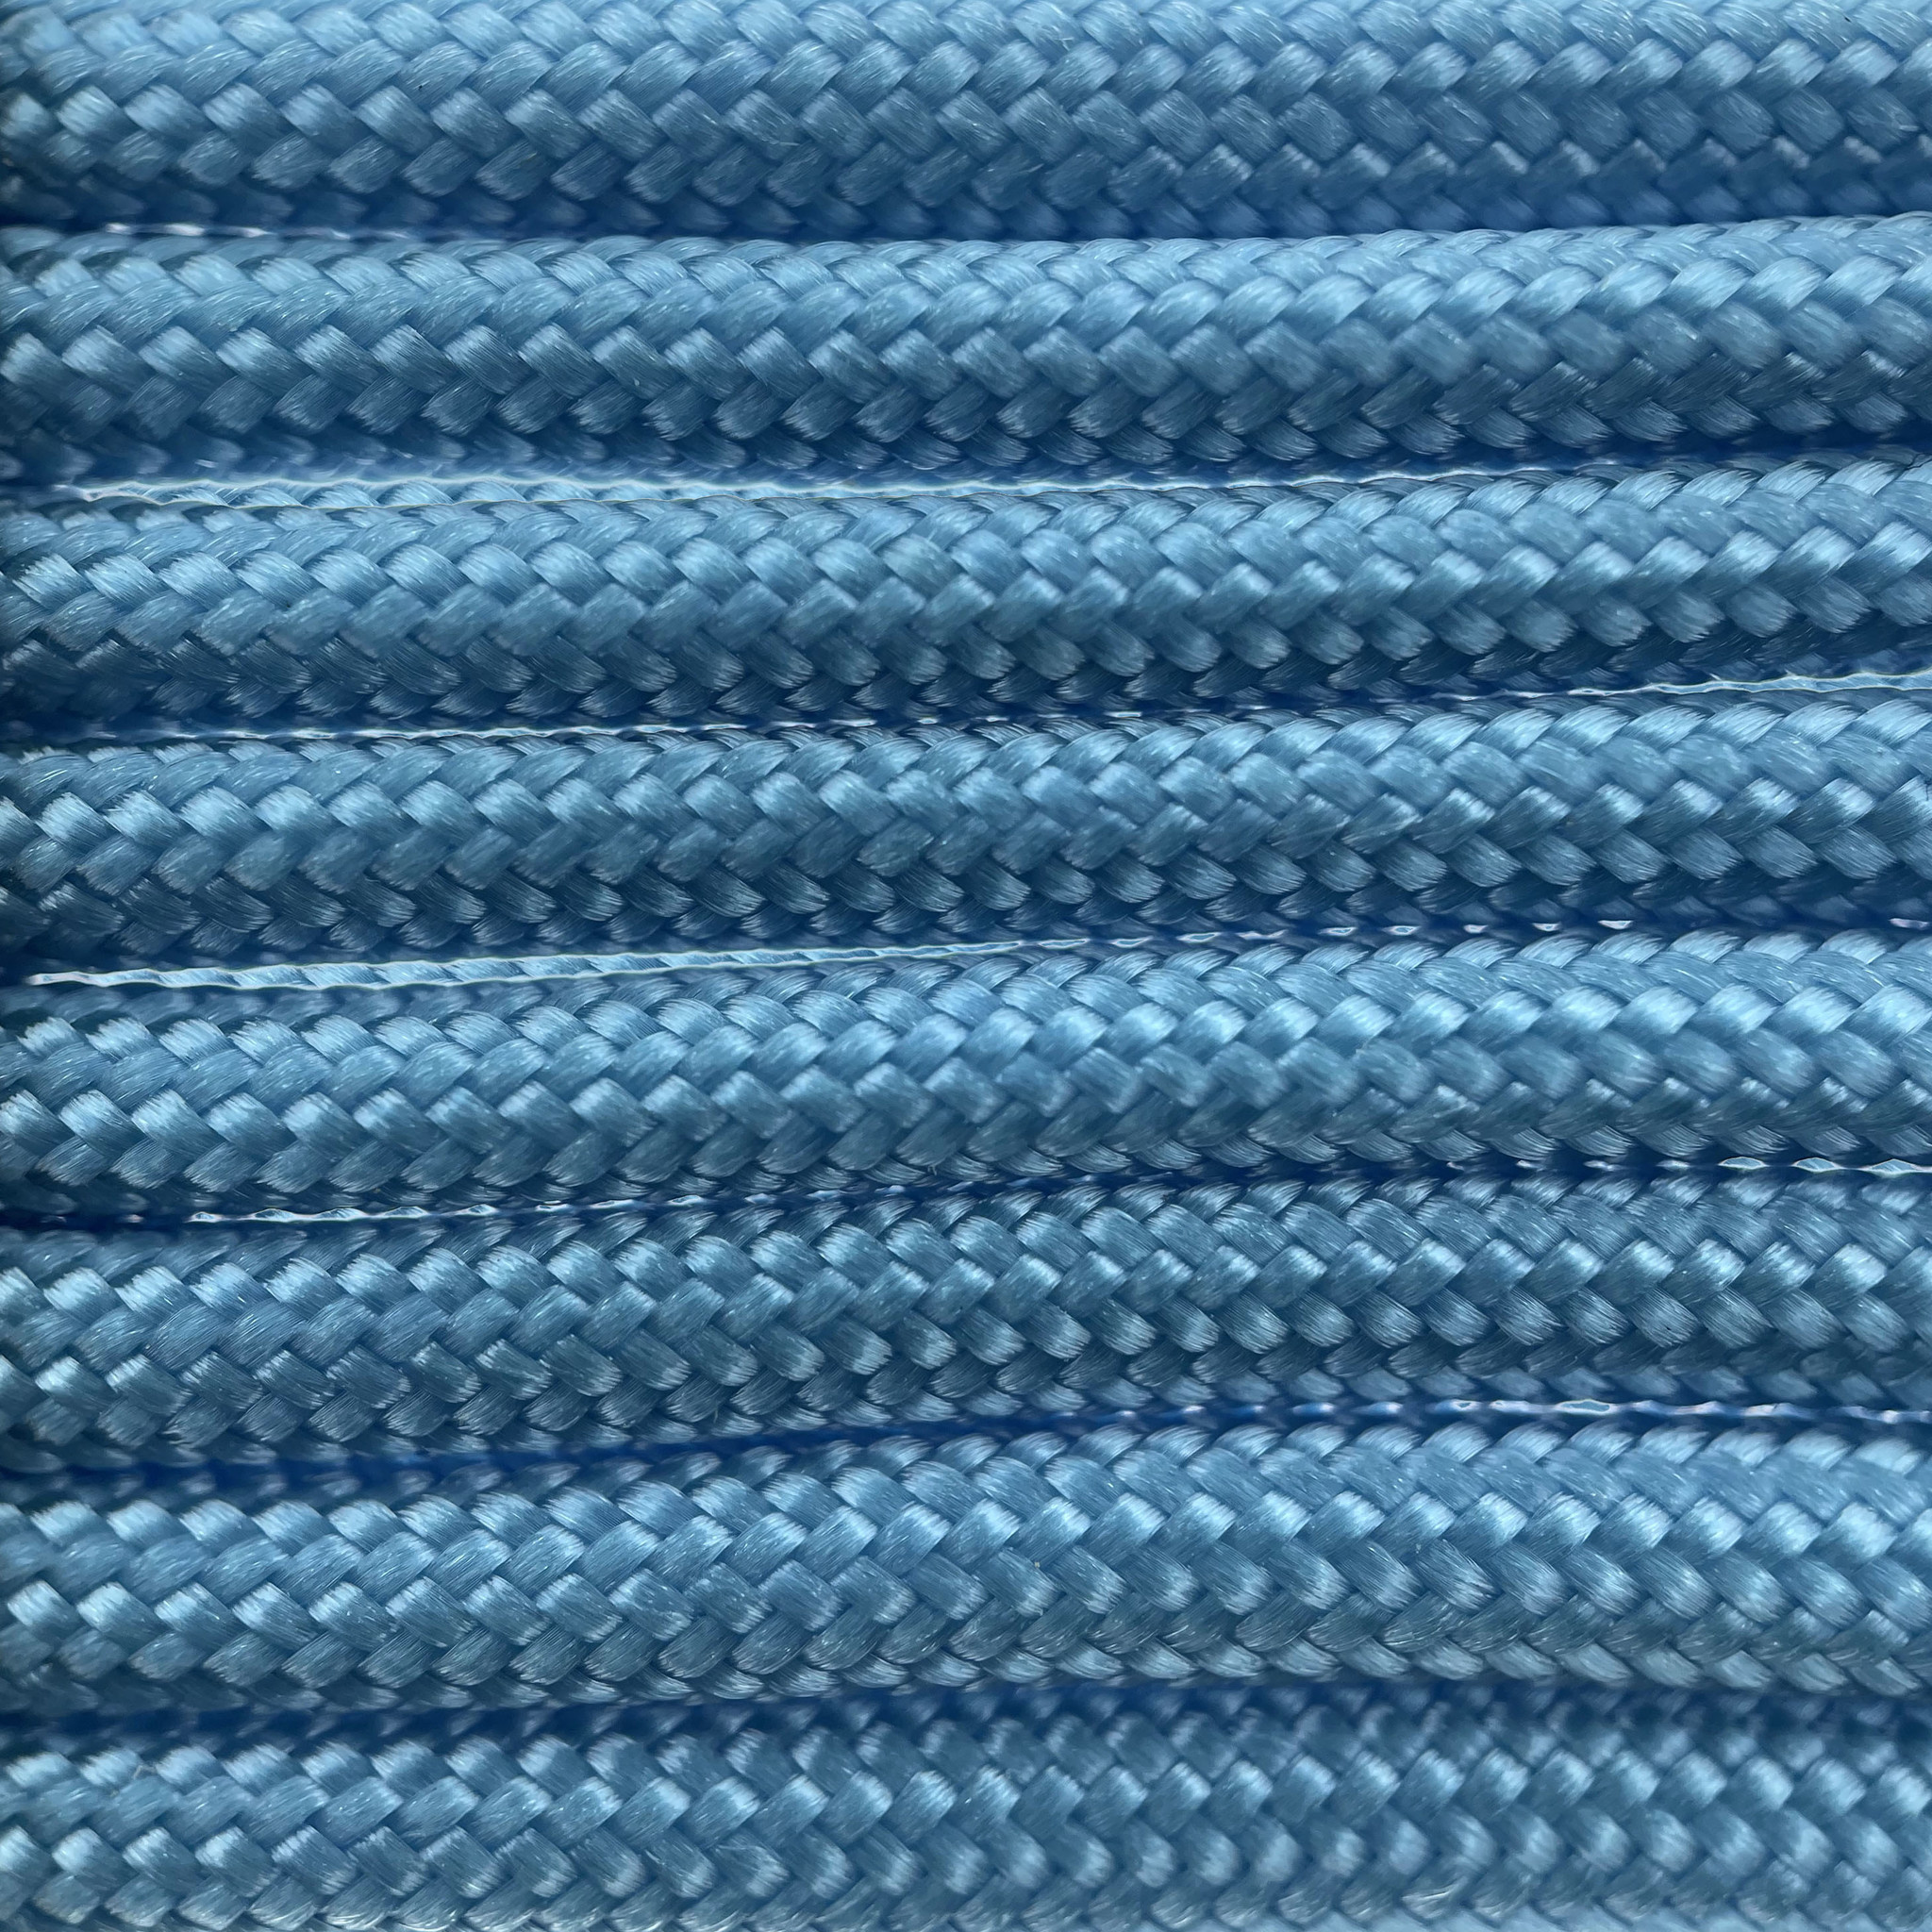 BLUE Snake Nano Cord Braided Paracord 0.75mm Jewelry Crafting